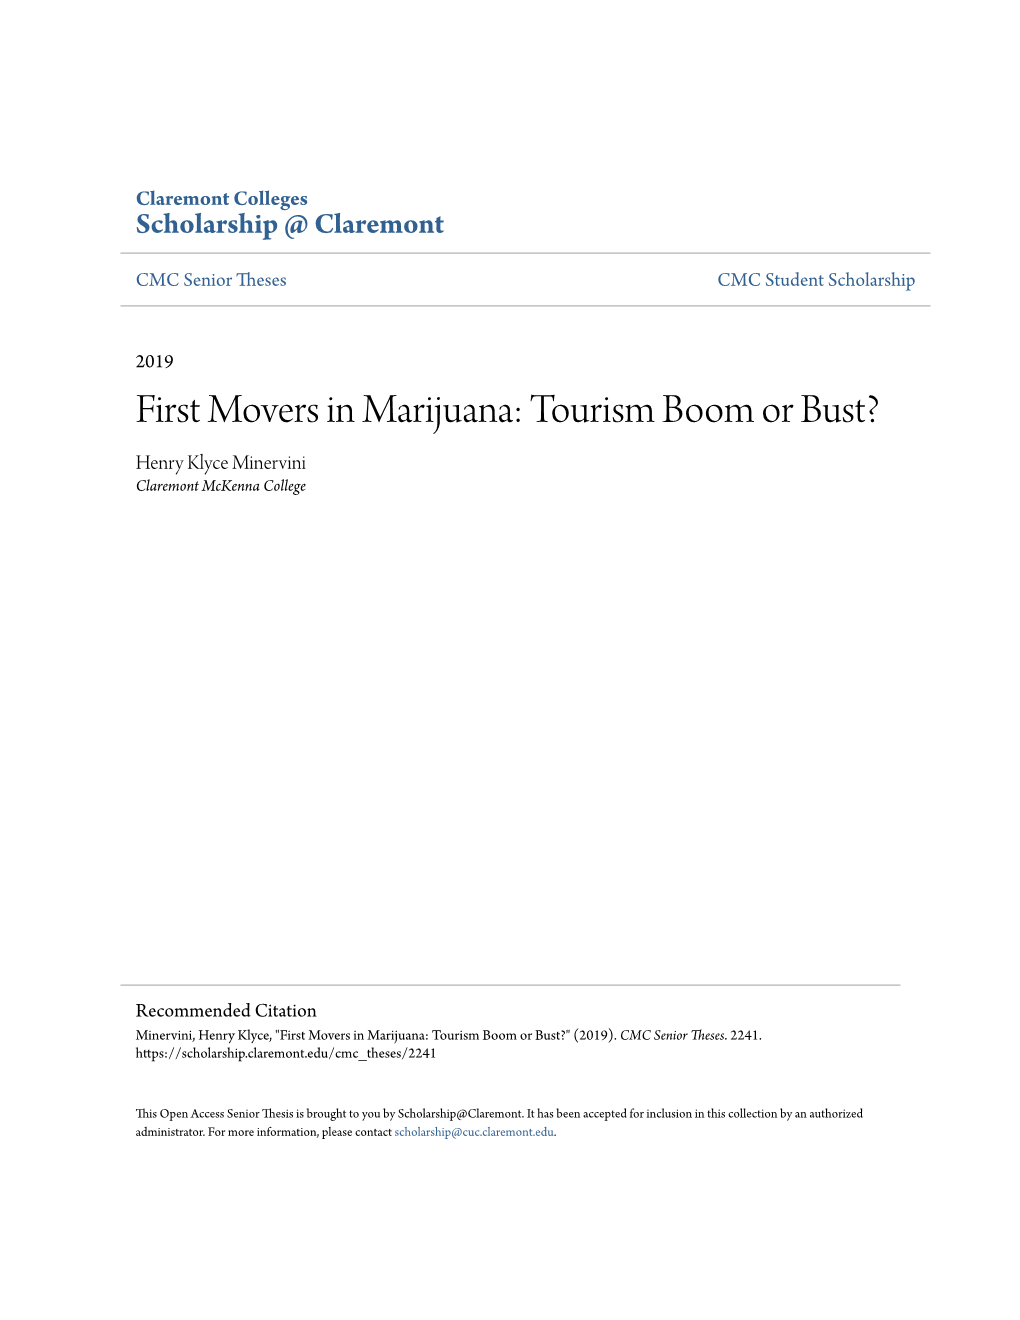 First Movers in Marijuana: Tourism Boom Or Bust? Henry Klyce Minervini Claremont Mckenna College